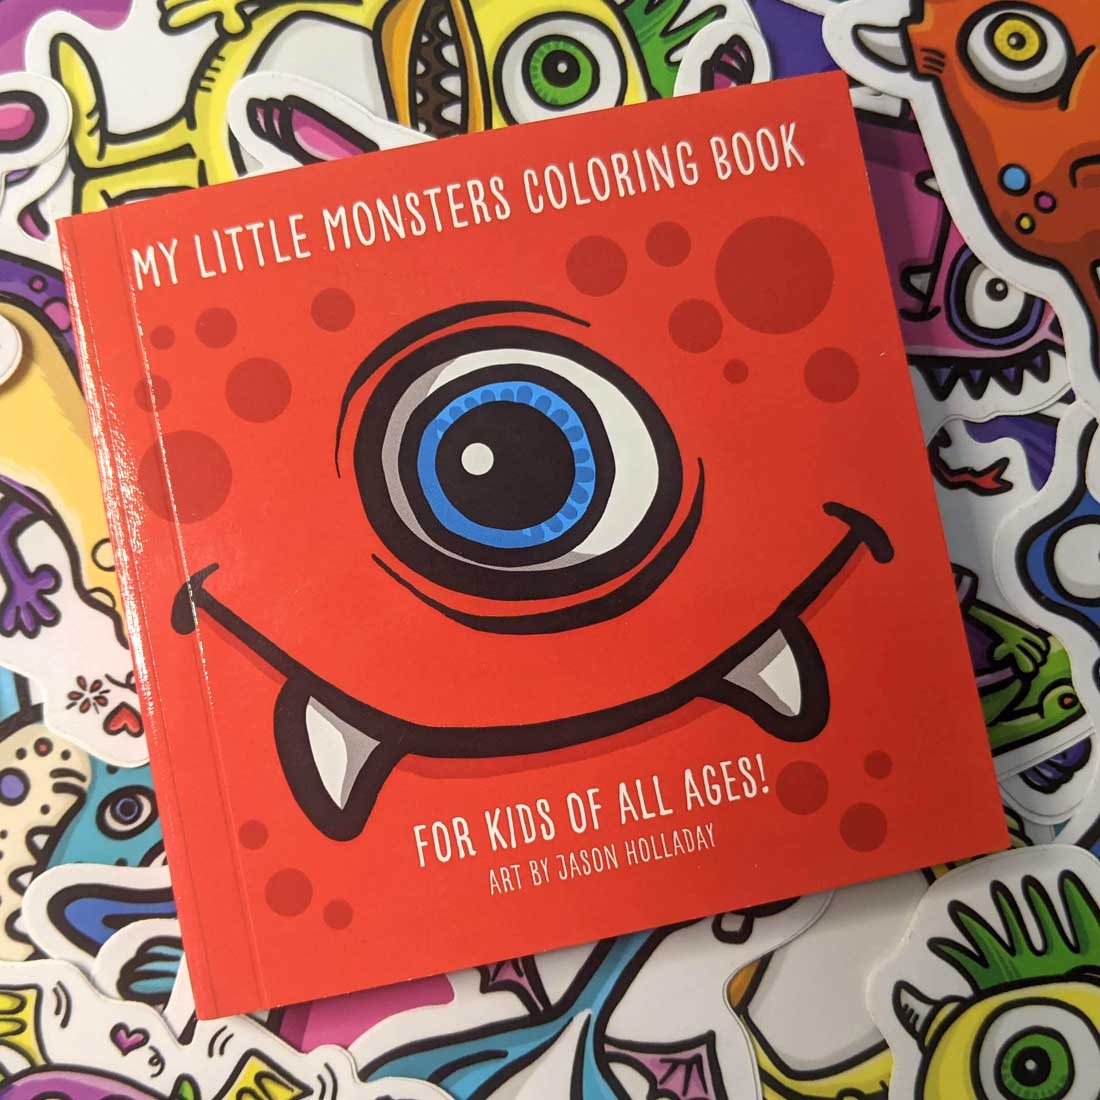 My Little Monsters Coloring Book